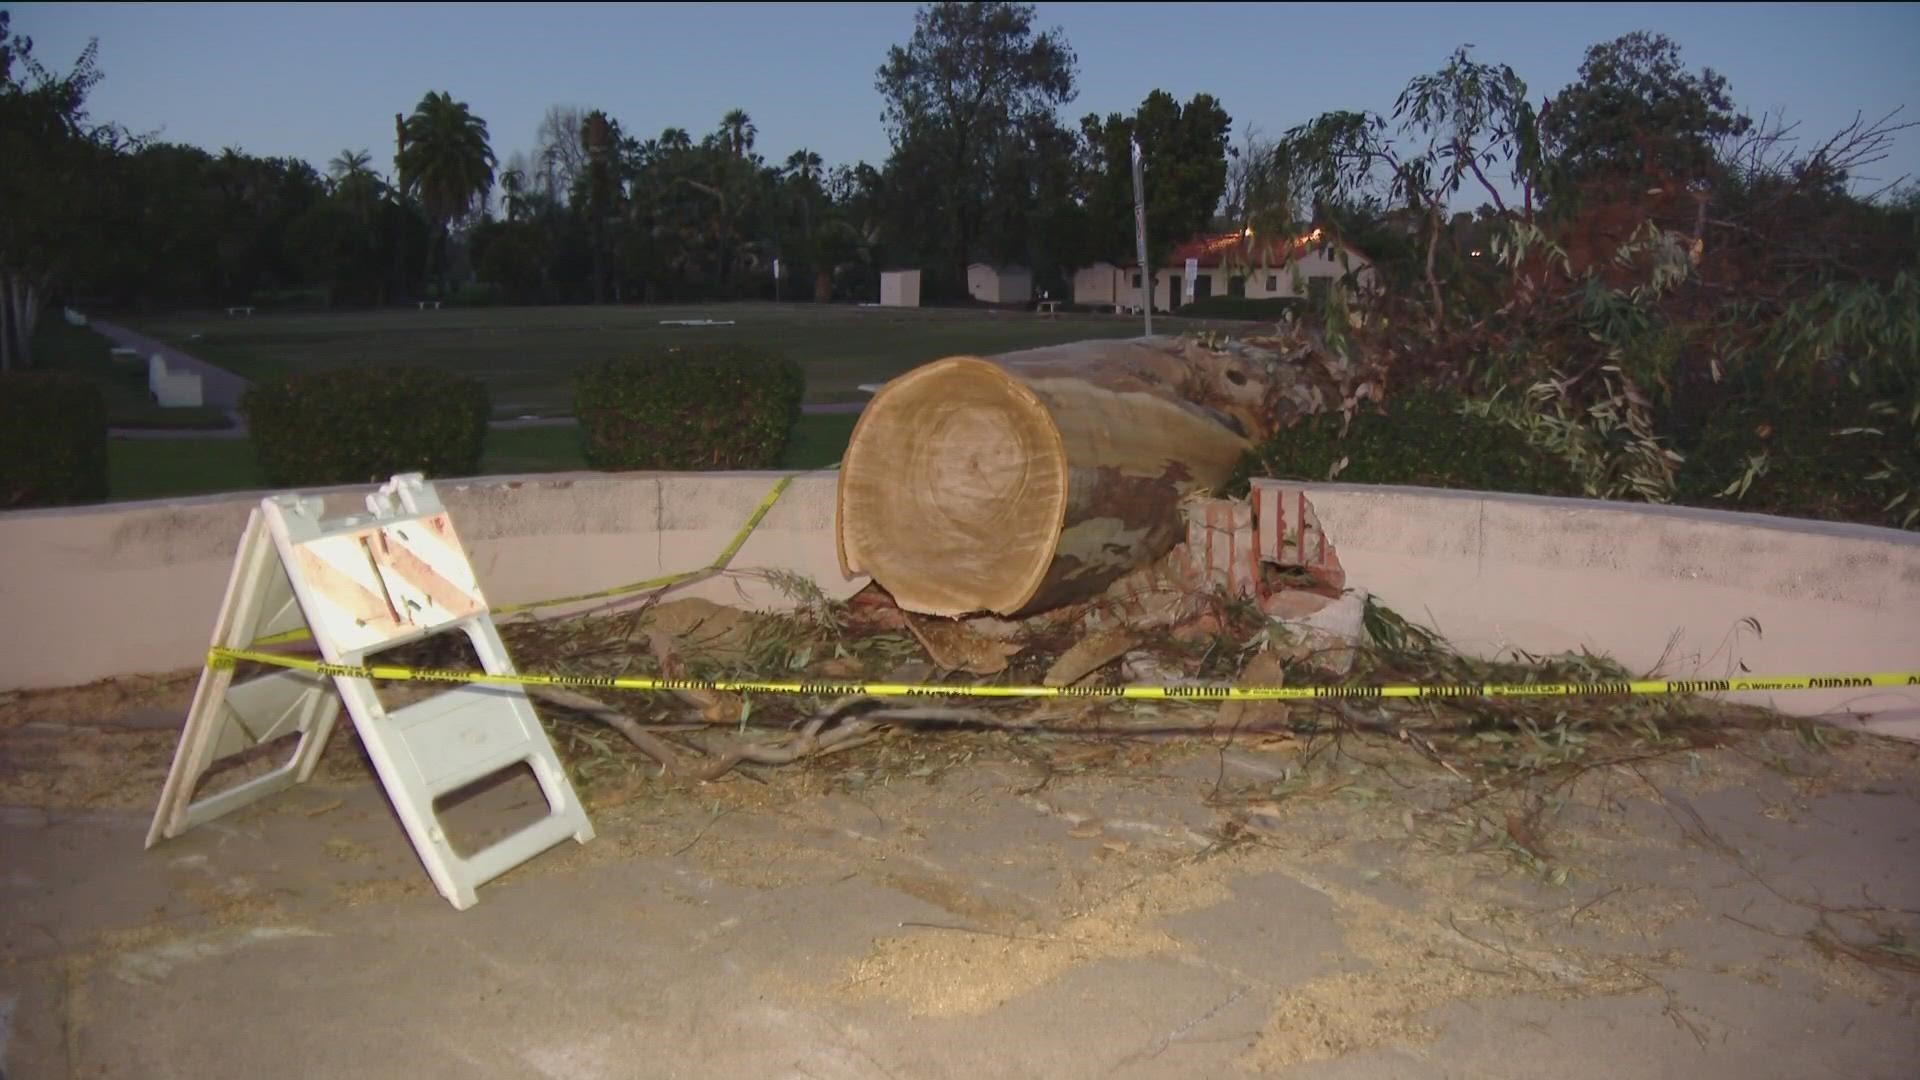 Officials have closed several parks fearing downed trees could wreak further havoc across as gusty winds sweep San Diego county.